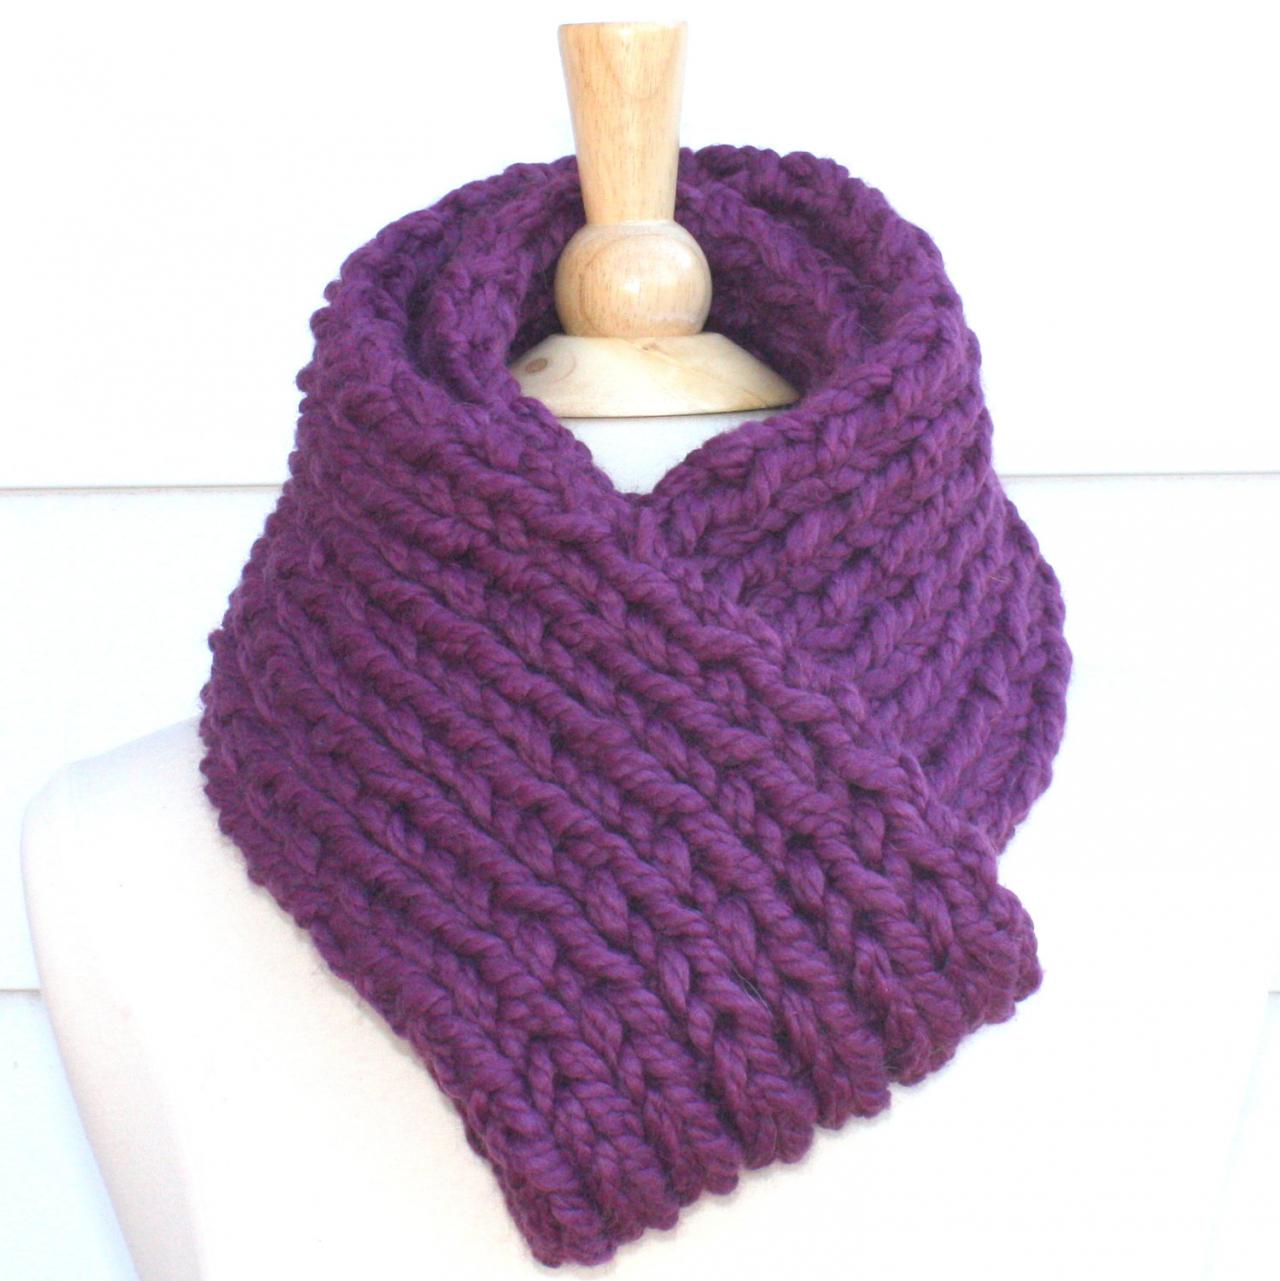 25% Off - Knitted Scarf - Soft Winter Scarf - Plum Purple - Thick Warm Sc-49